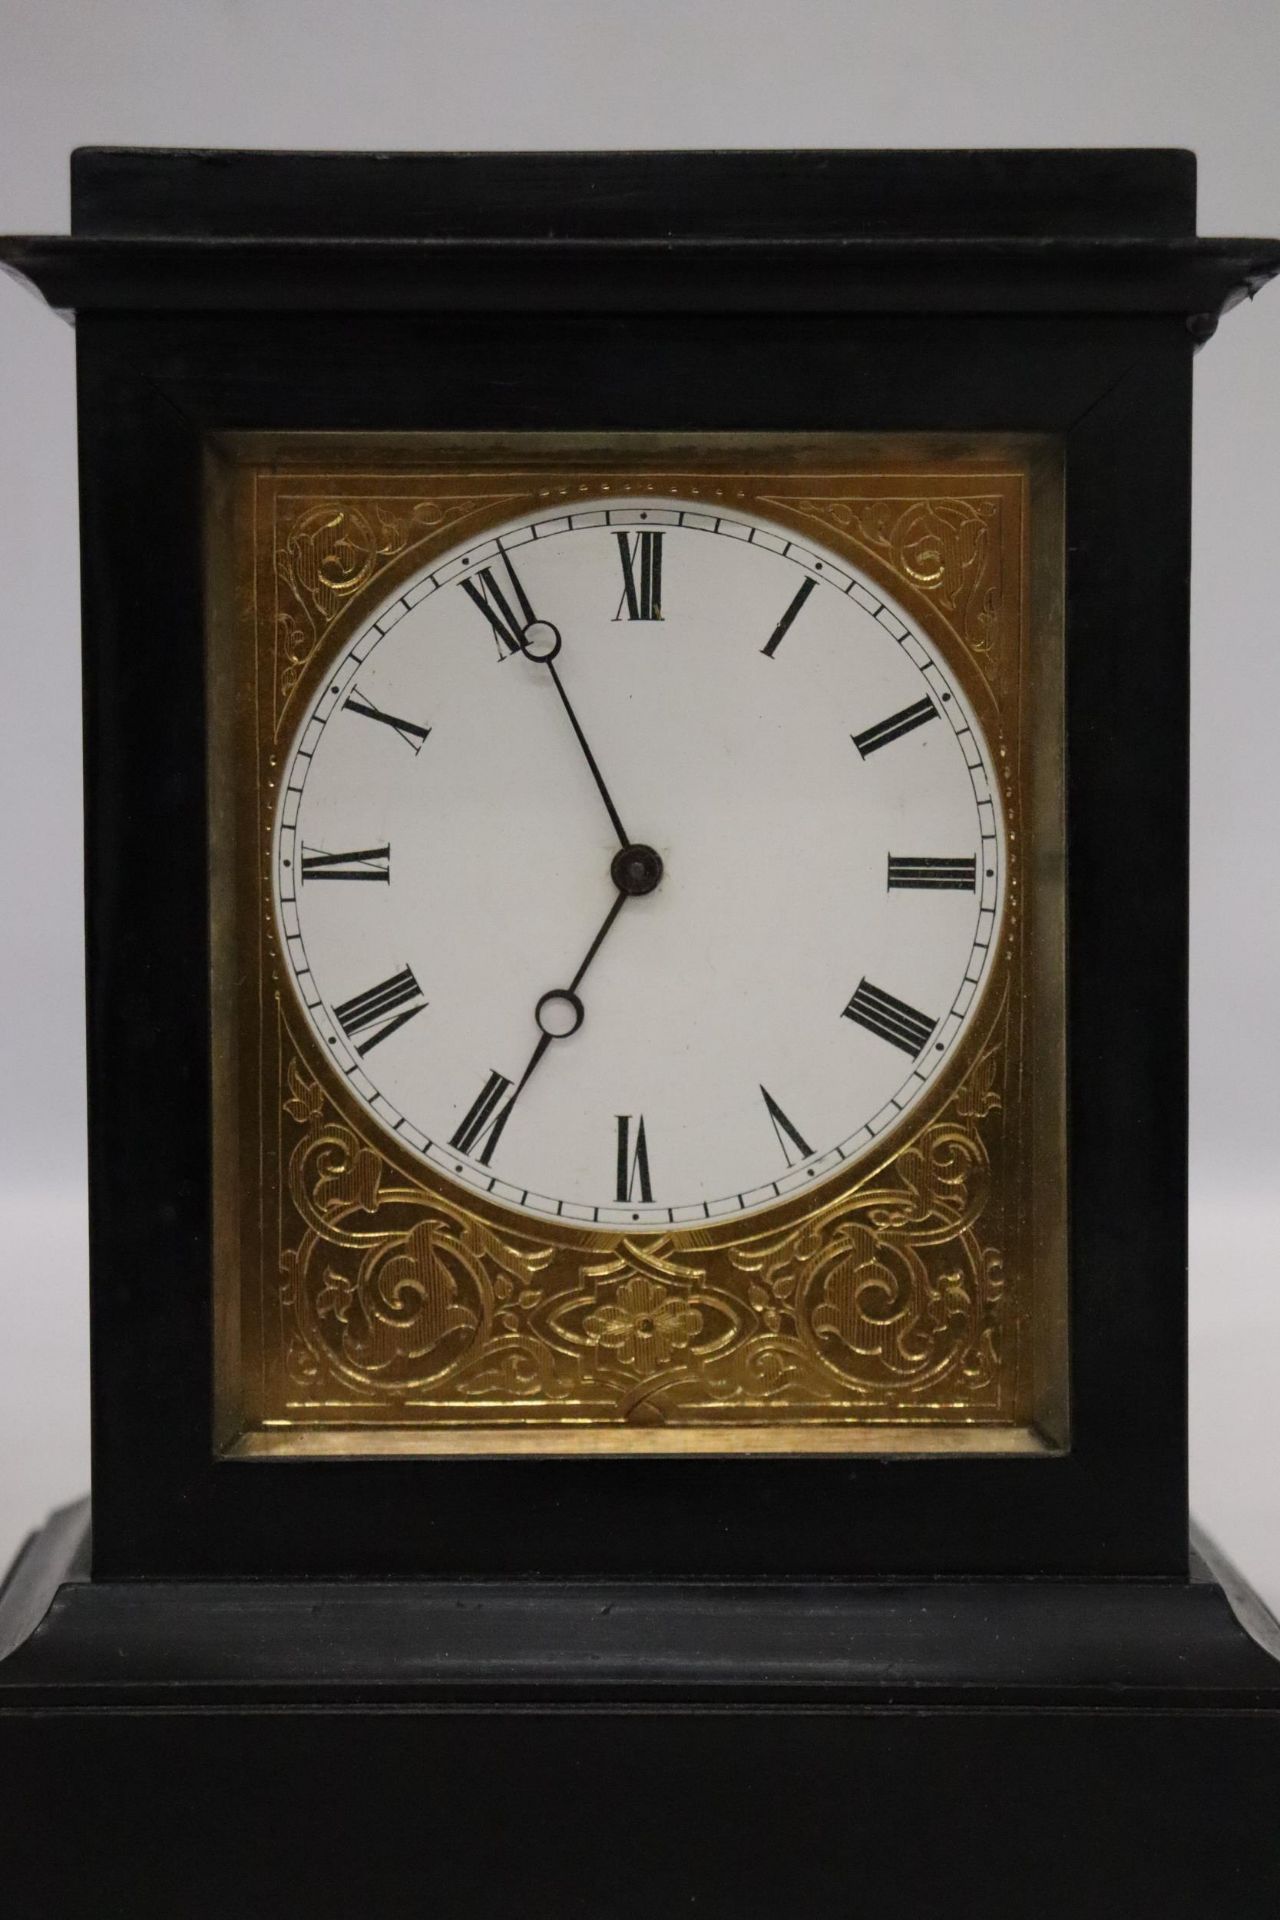 A MID 19TH CENTURY MAHOGANY MANTLE CLOCK THE MOVEMENT SIGNED V.A.P. BREVETTE S.G.D.G NO 653 - Image 6 of 7